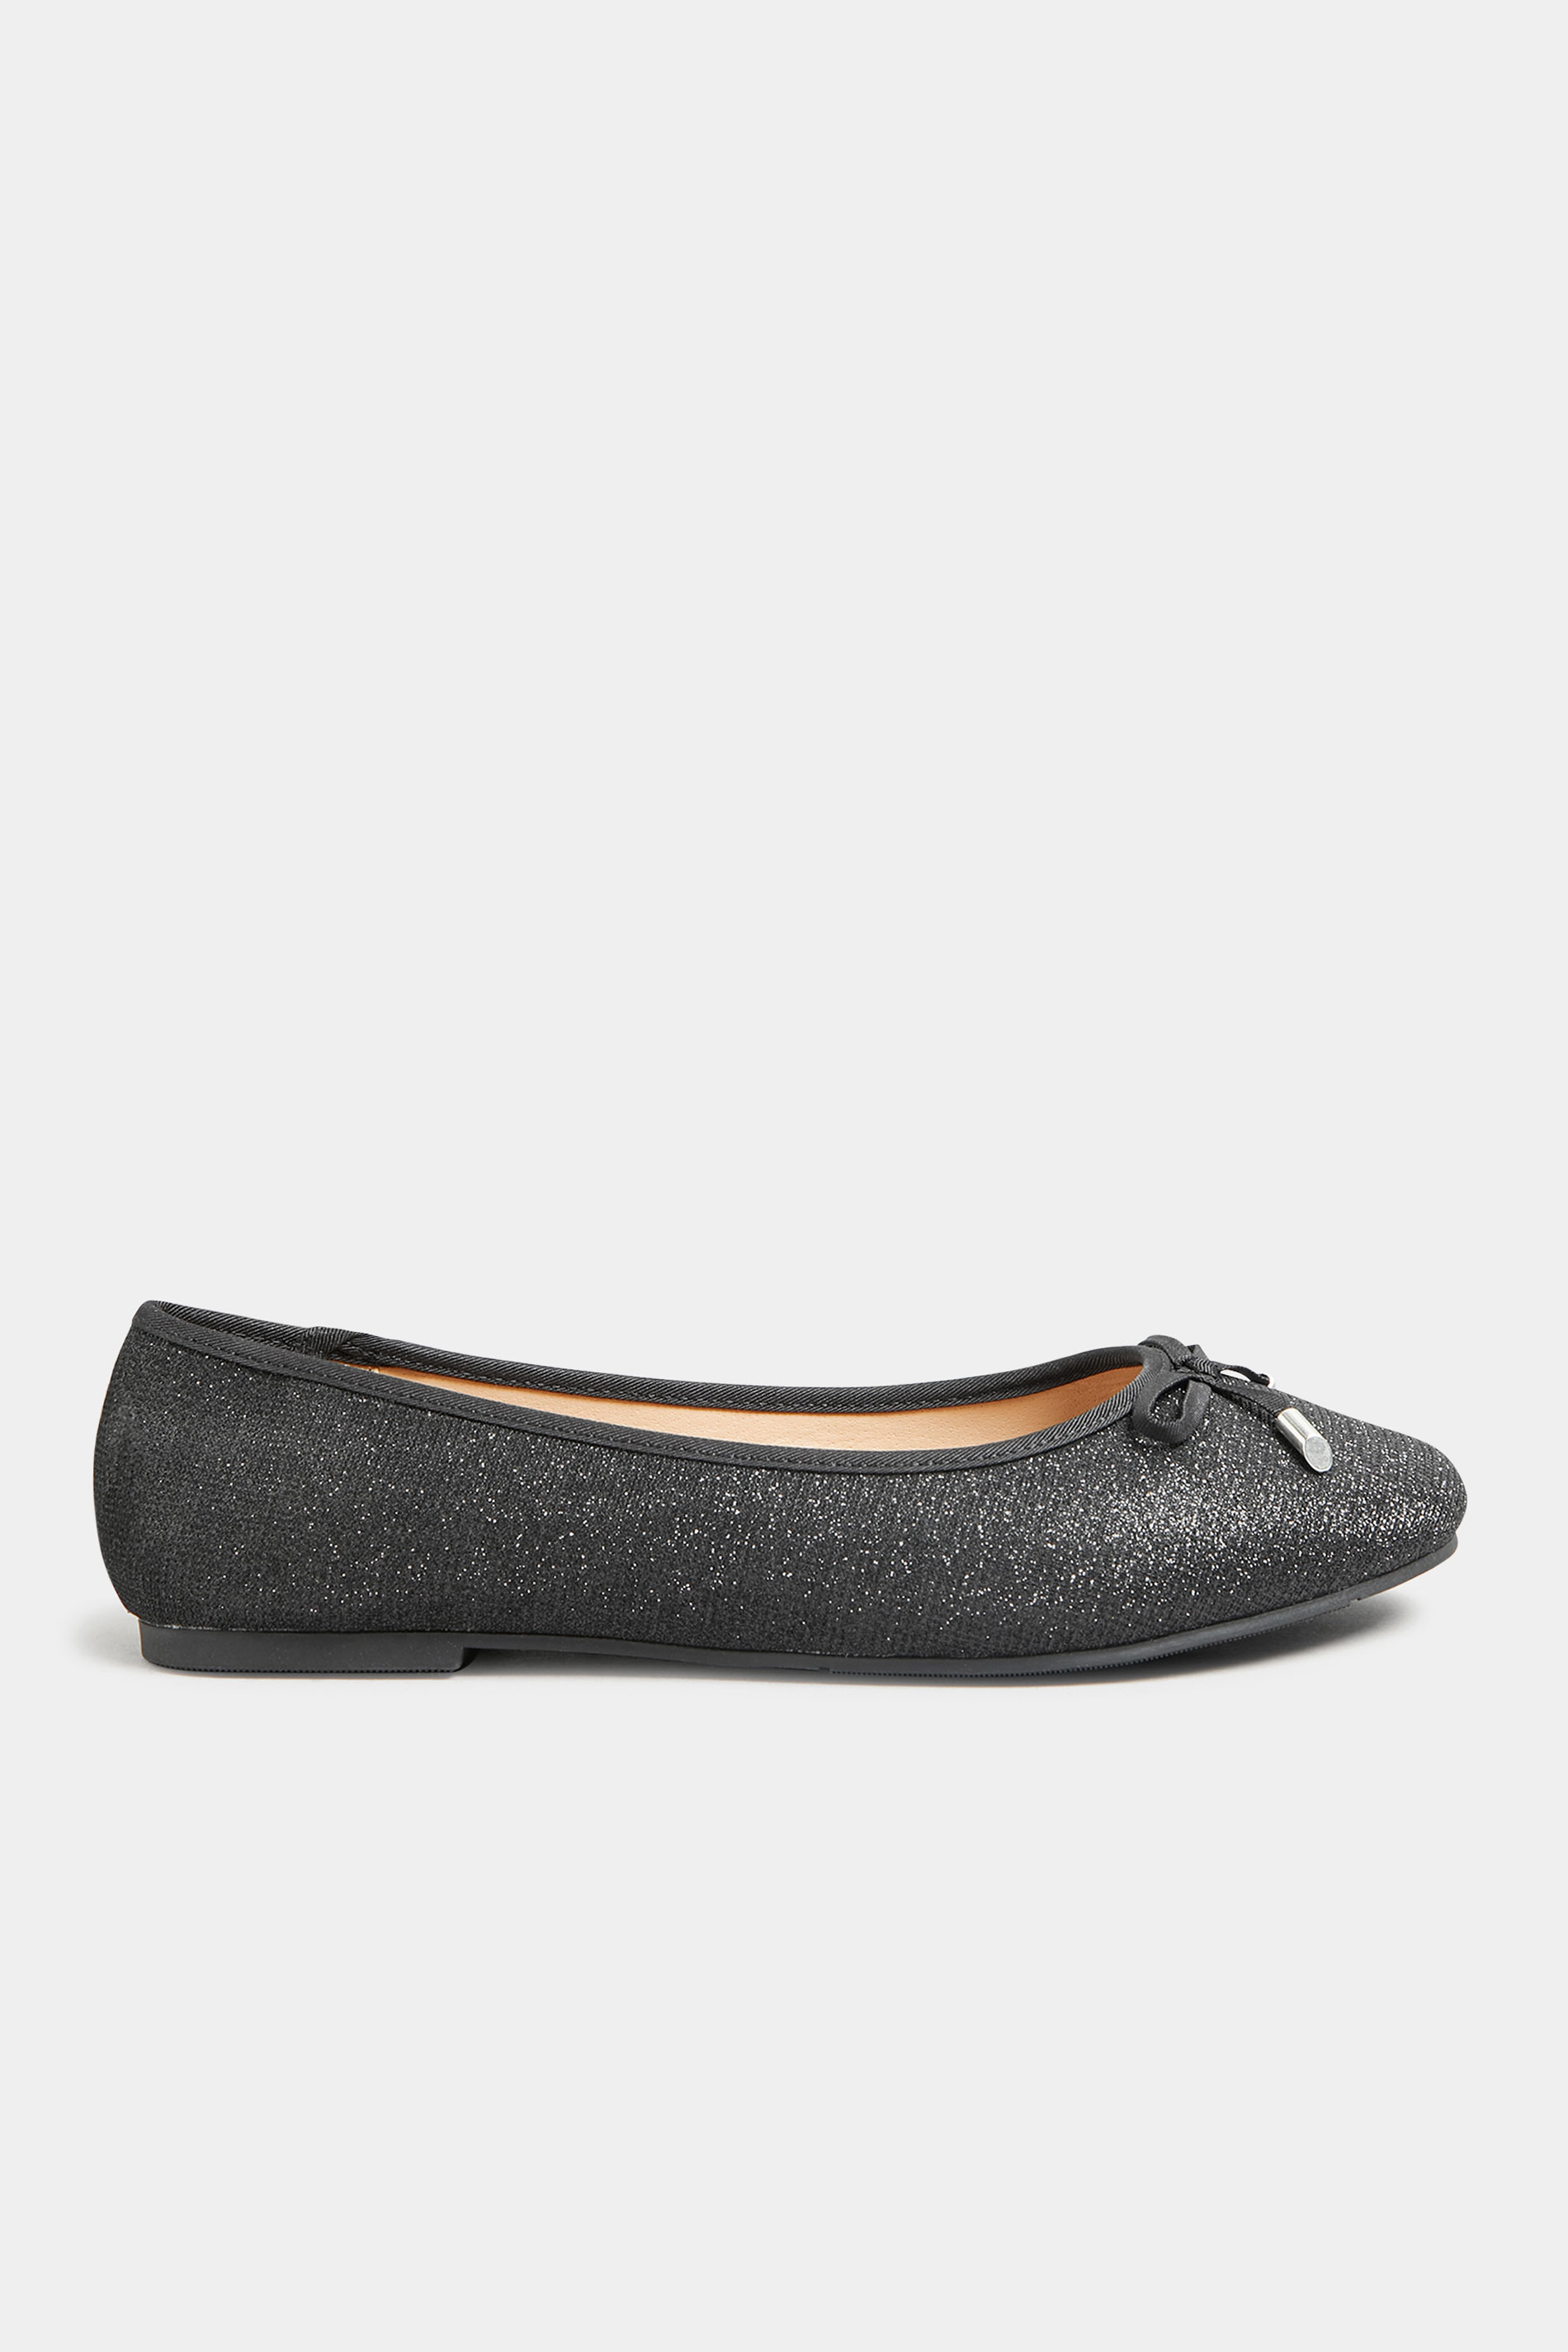 Continu Spaans Voorgevoel Black Glitter Ballerina Pumps In Wide E Fit & Extra Wide EEE Fit | Yours  Clothing